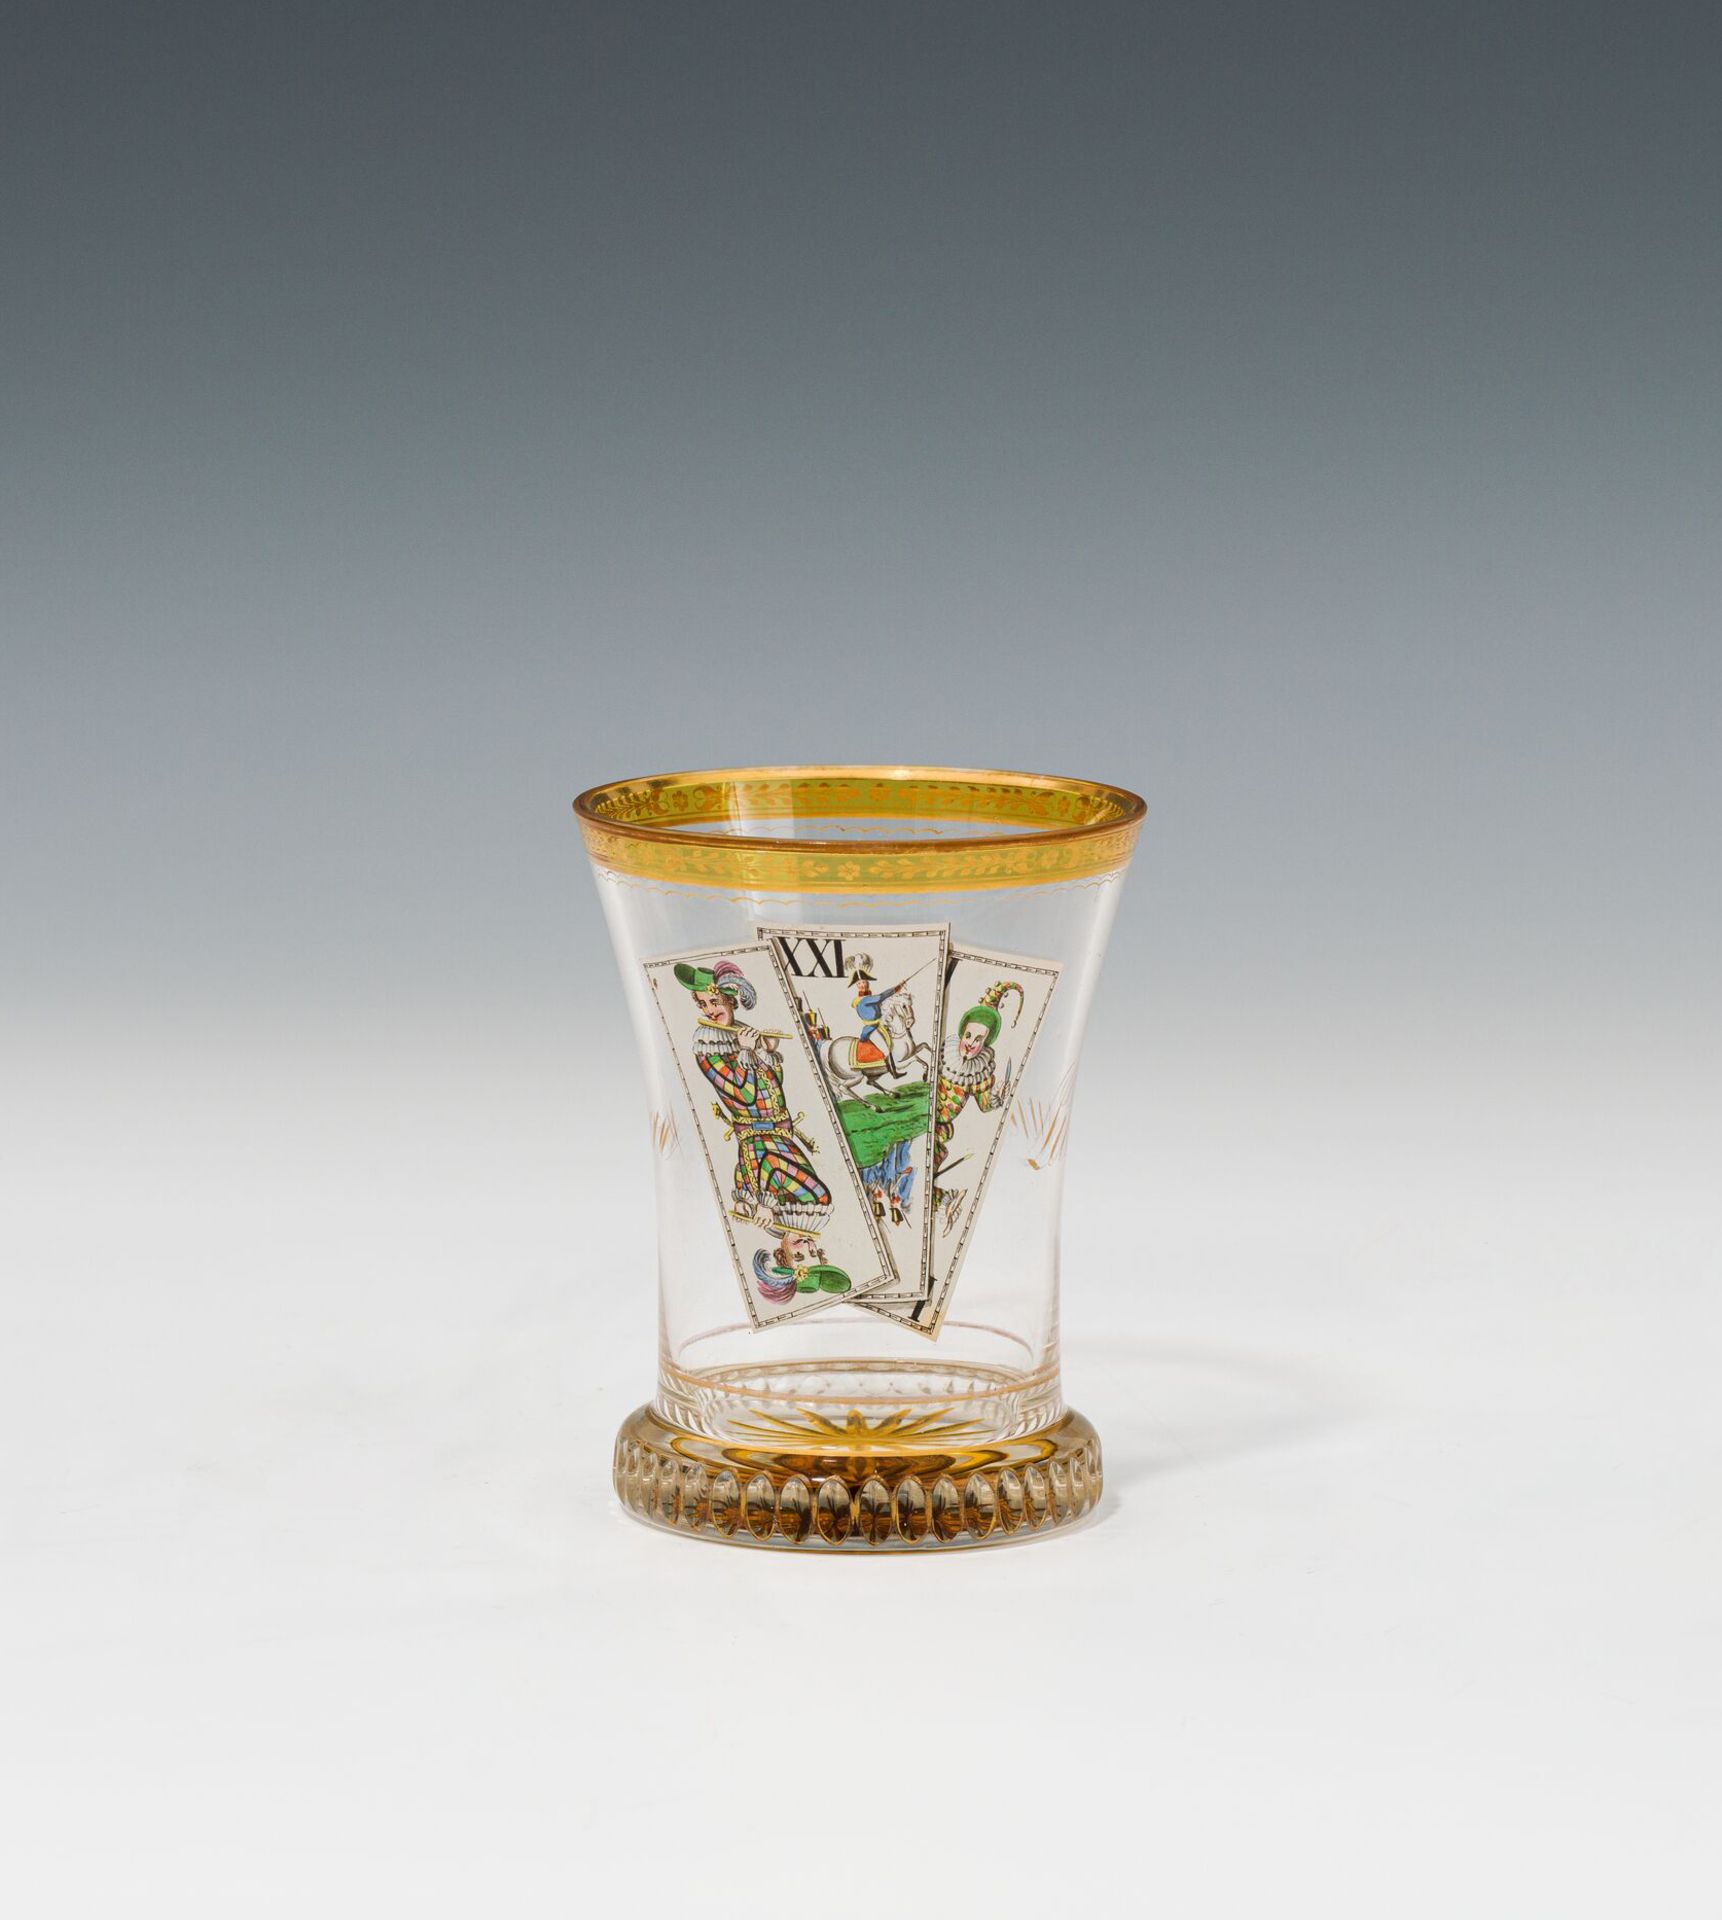 Anton KothgasserBeaker with trull cardsVienna, c. 1820colourless glass, partly stained yellow,